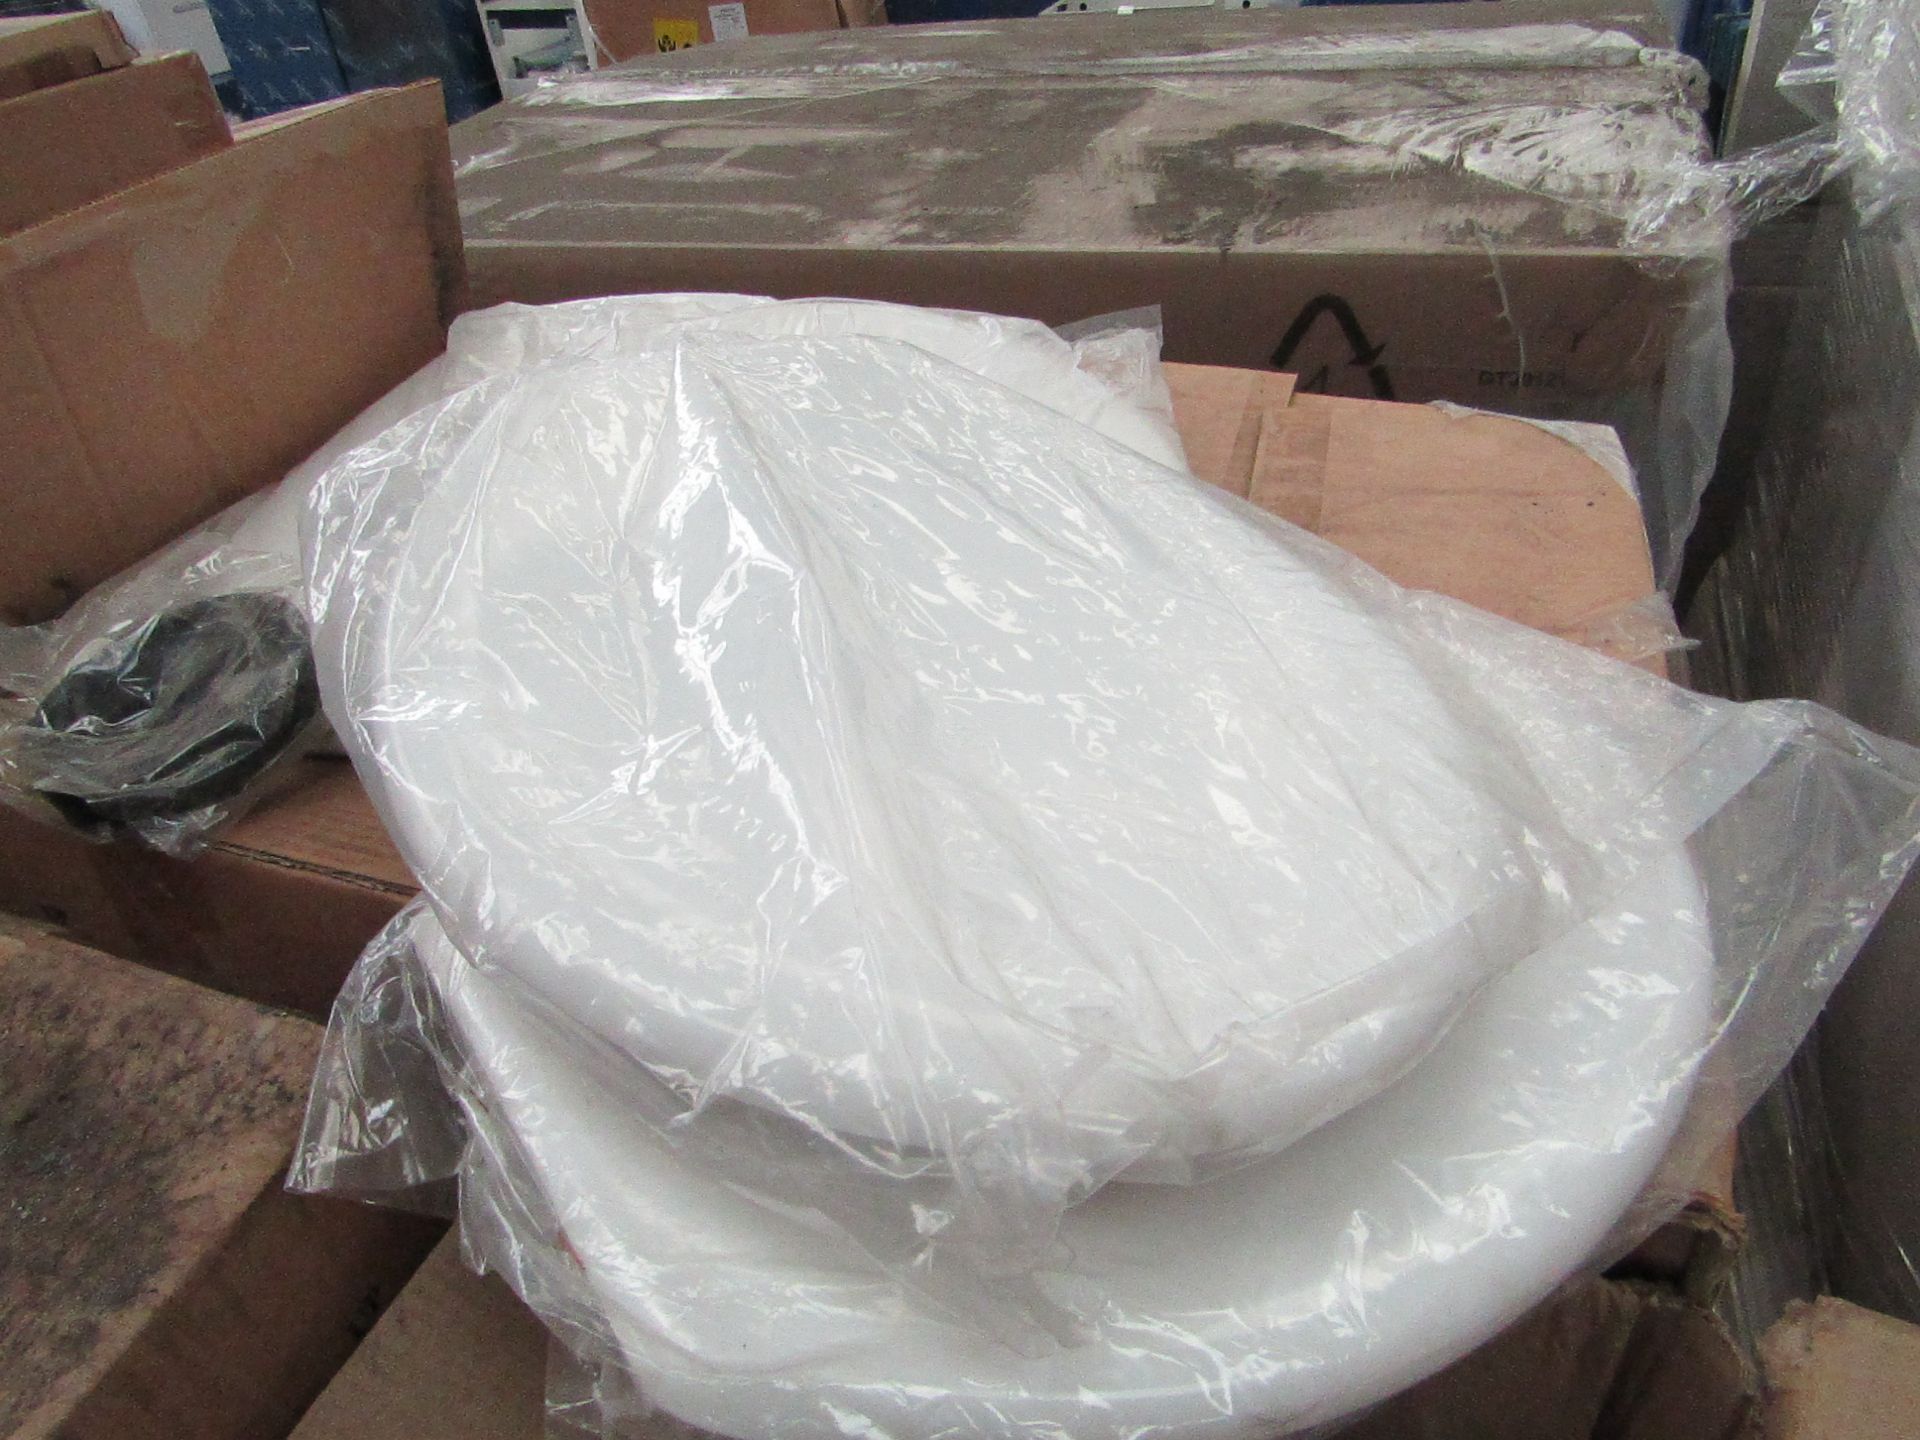 5x Unbranded Roca toilet seats, all new.